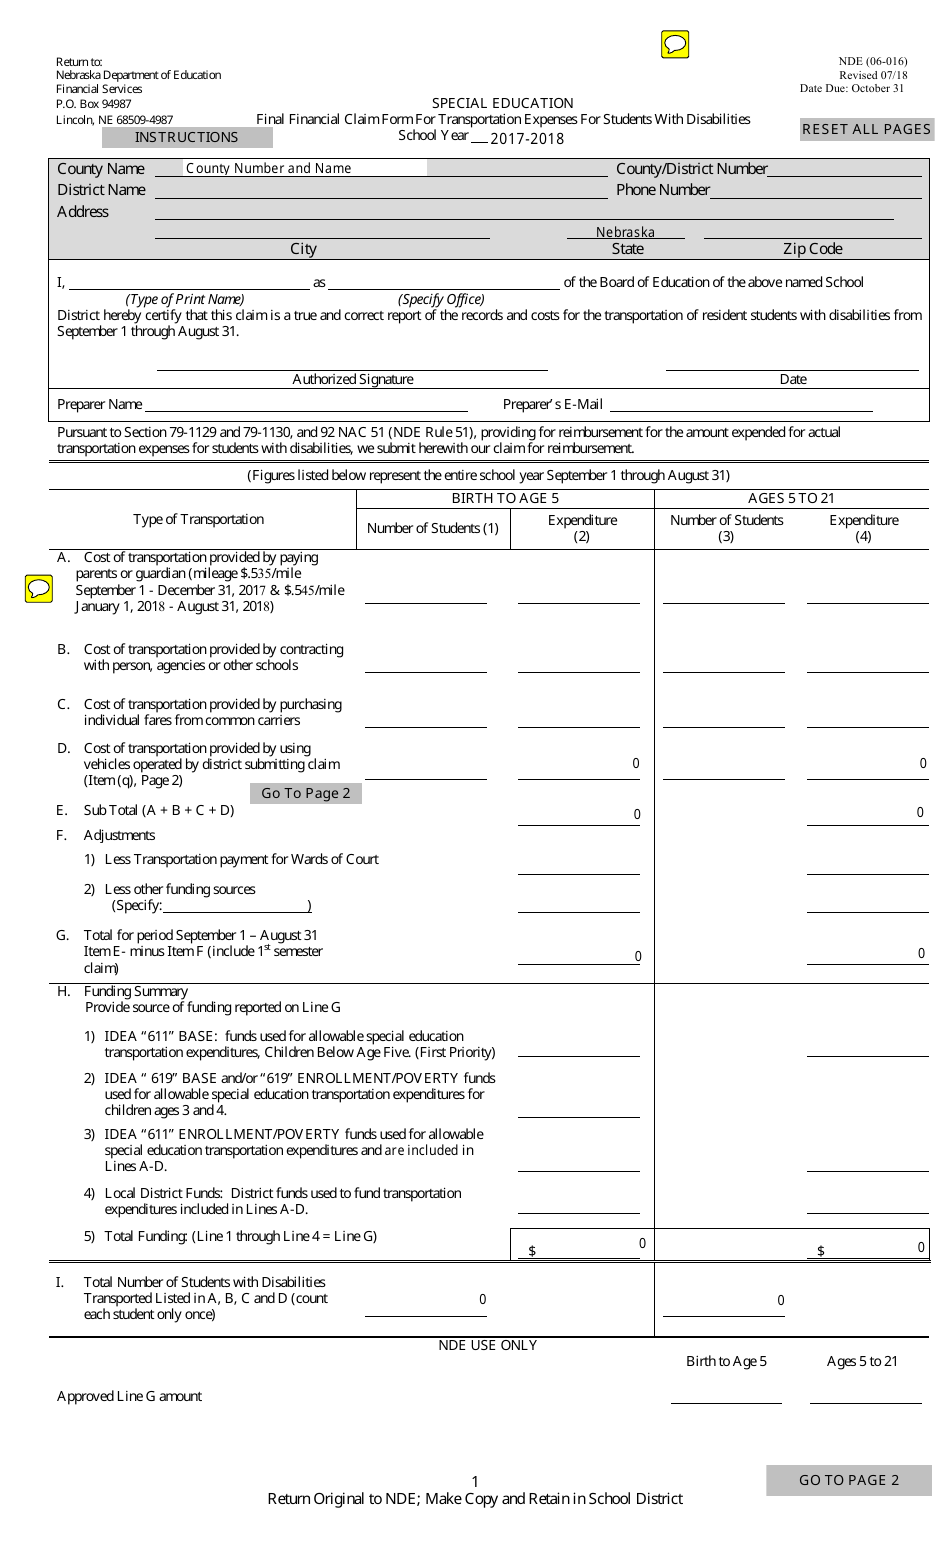 NDE Form 06-016 Final Financial Claim Form for Transportation Expenses for Students With Disabilities - Nebraska, Page 1